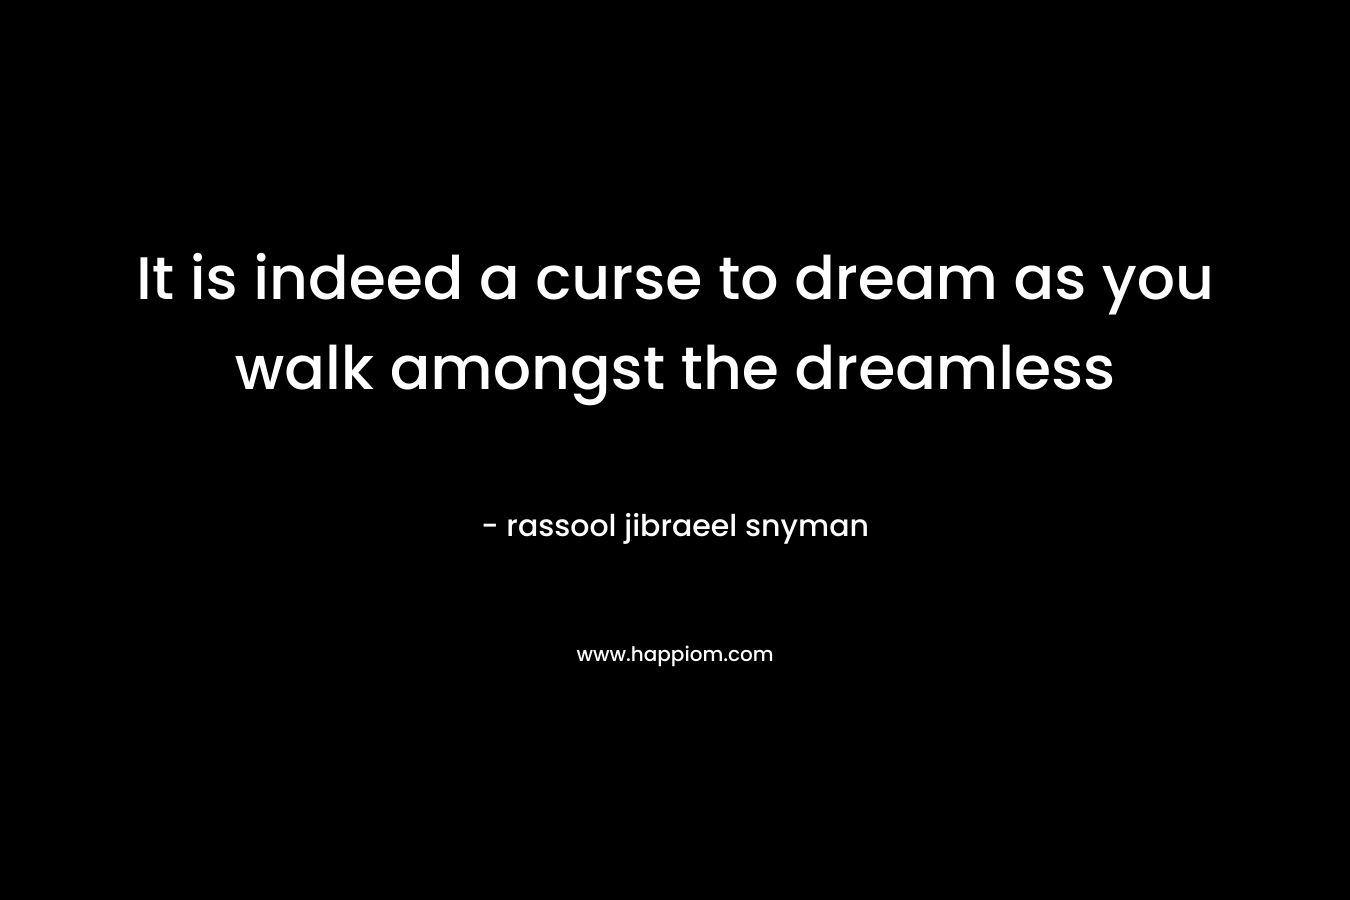 It is indeed a curse to dream as you walk amongst the dreamless